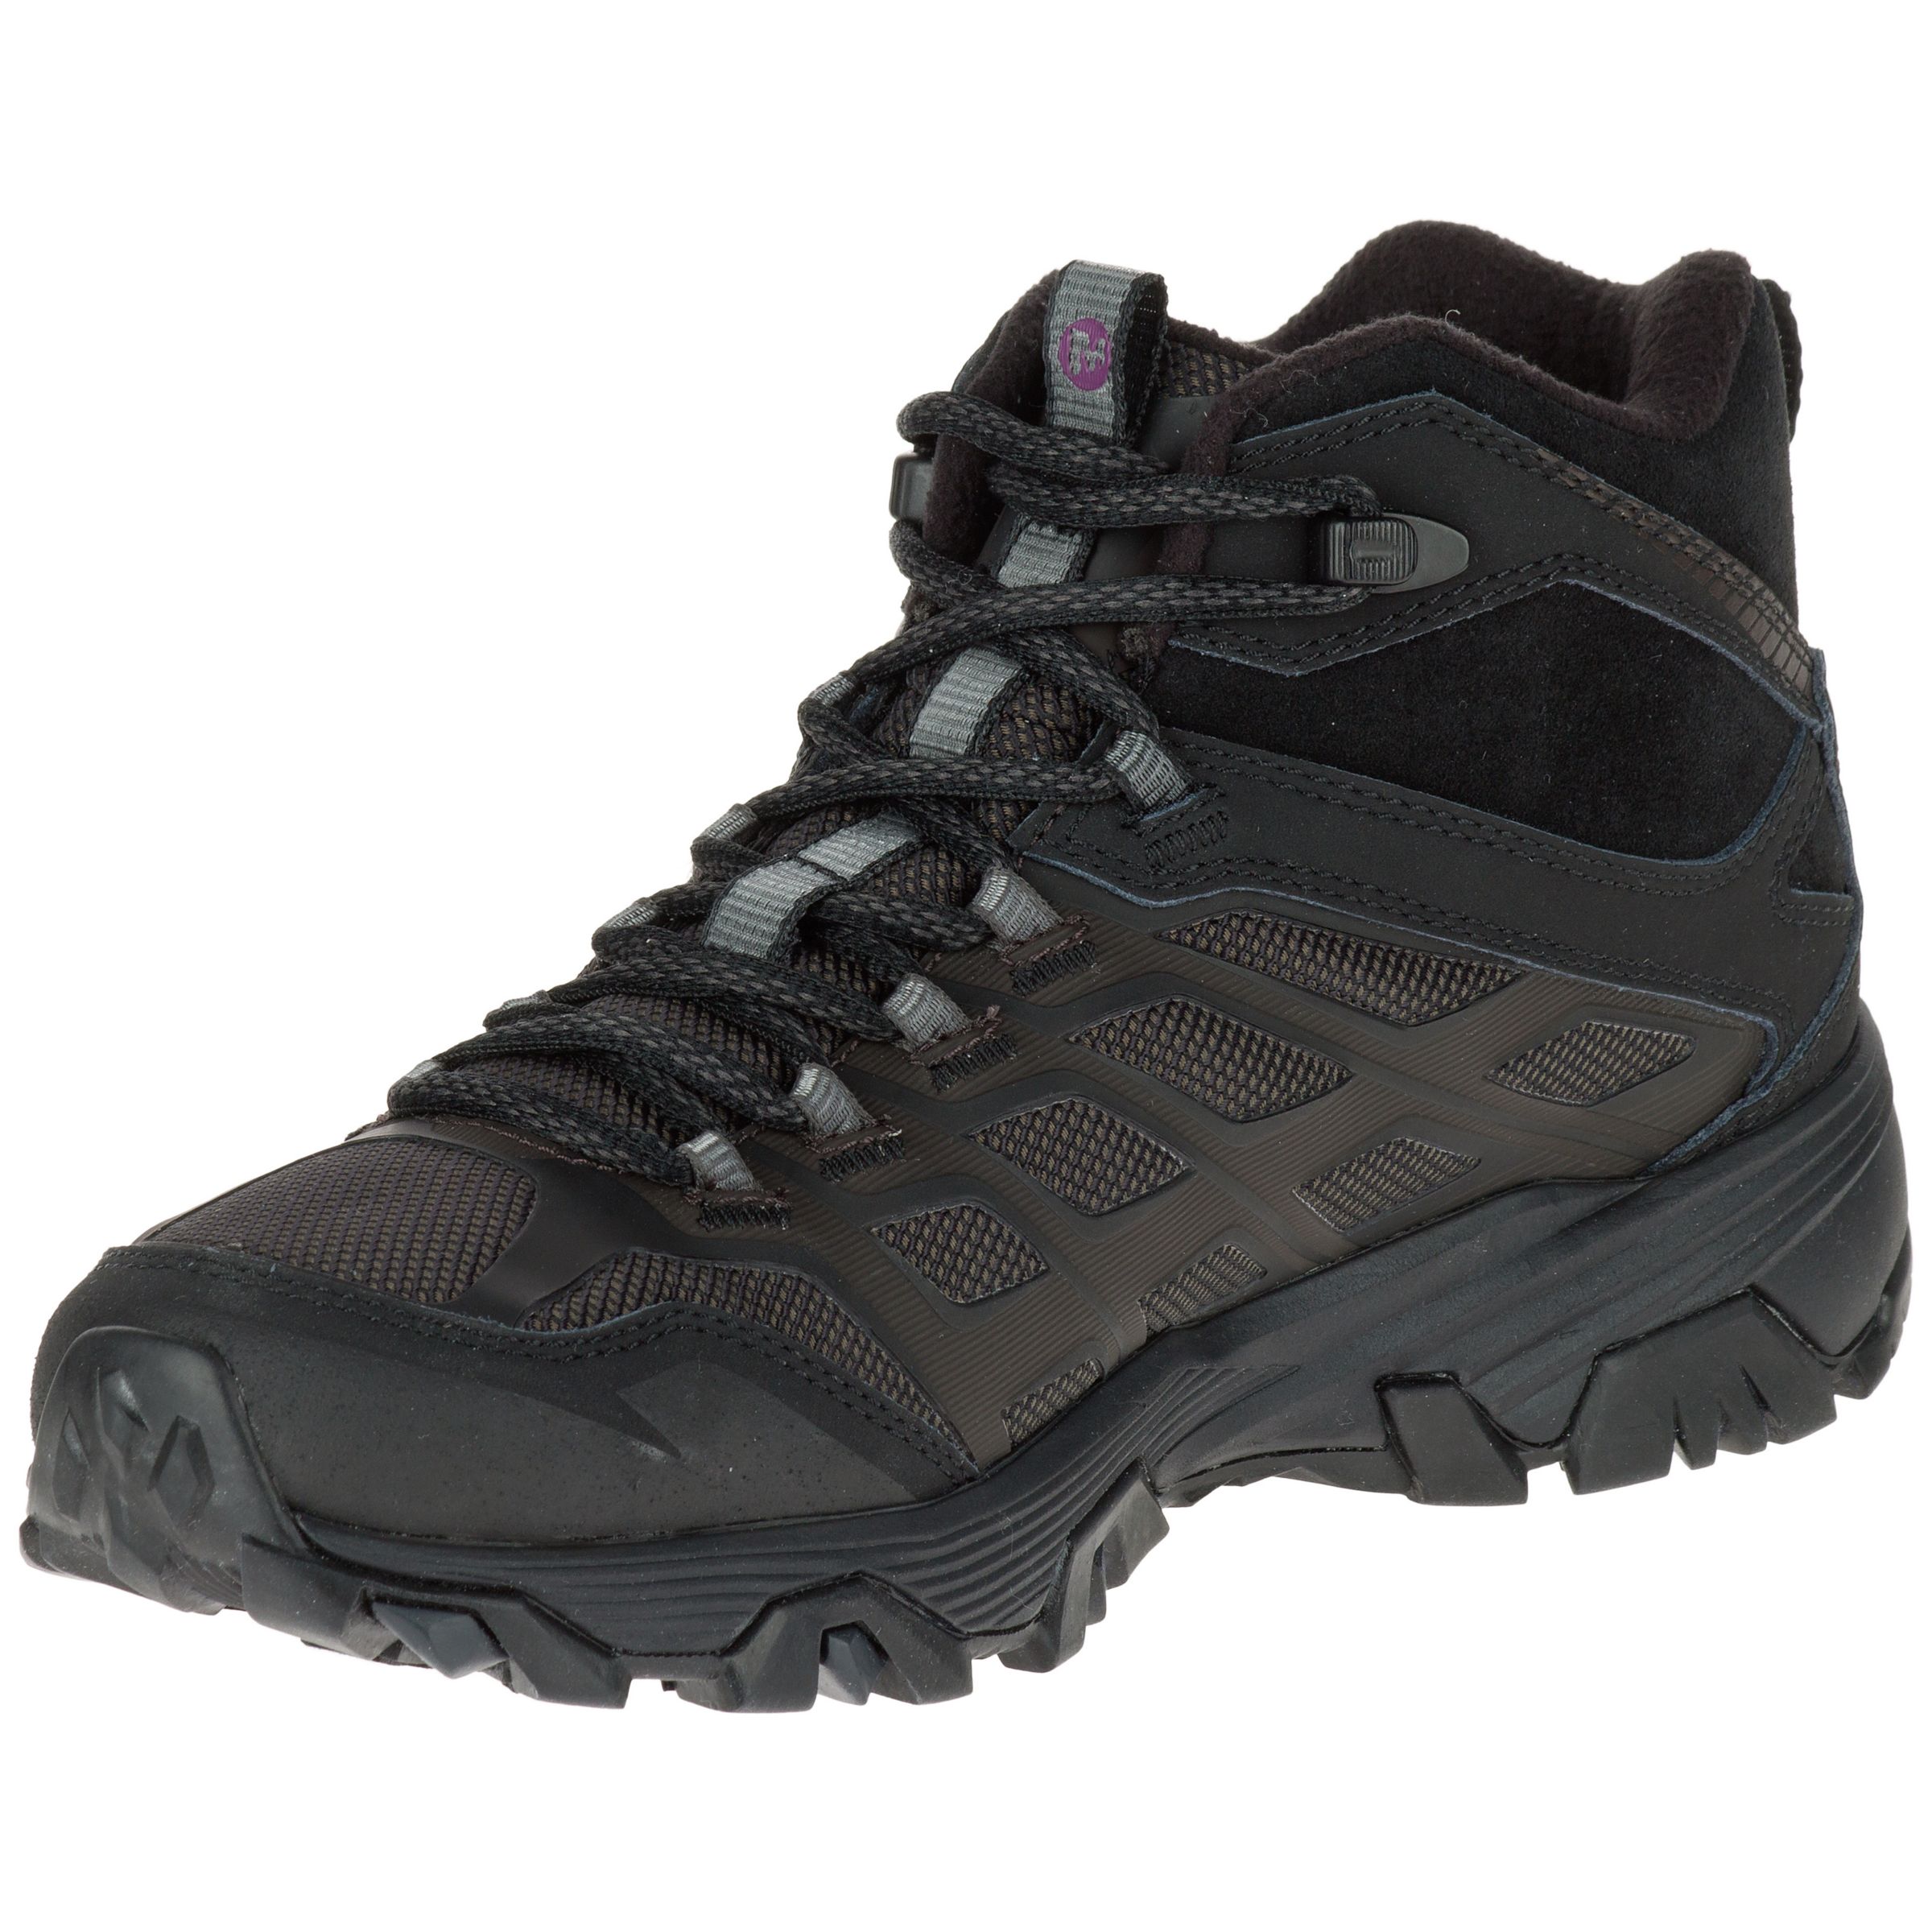 Merrell Moab FST Ice+ Thermo Women's Walking Shoes, Black